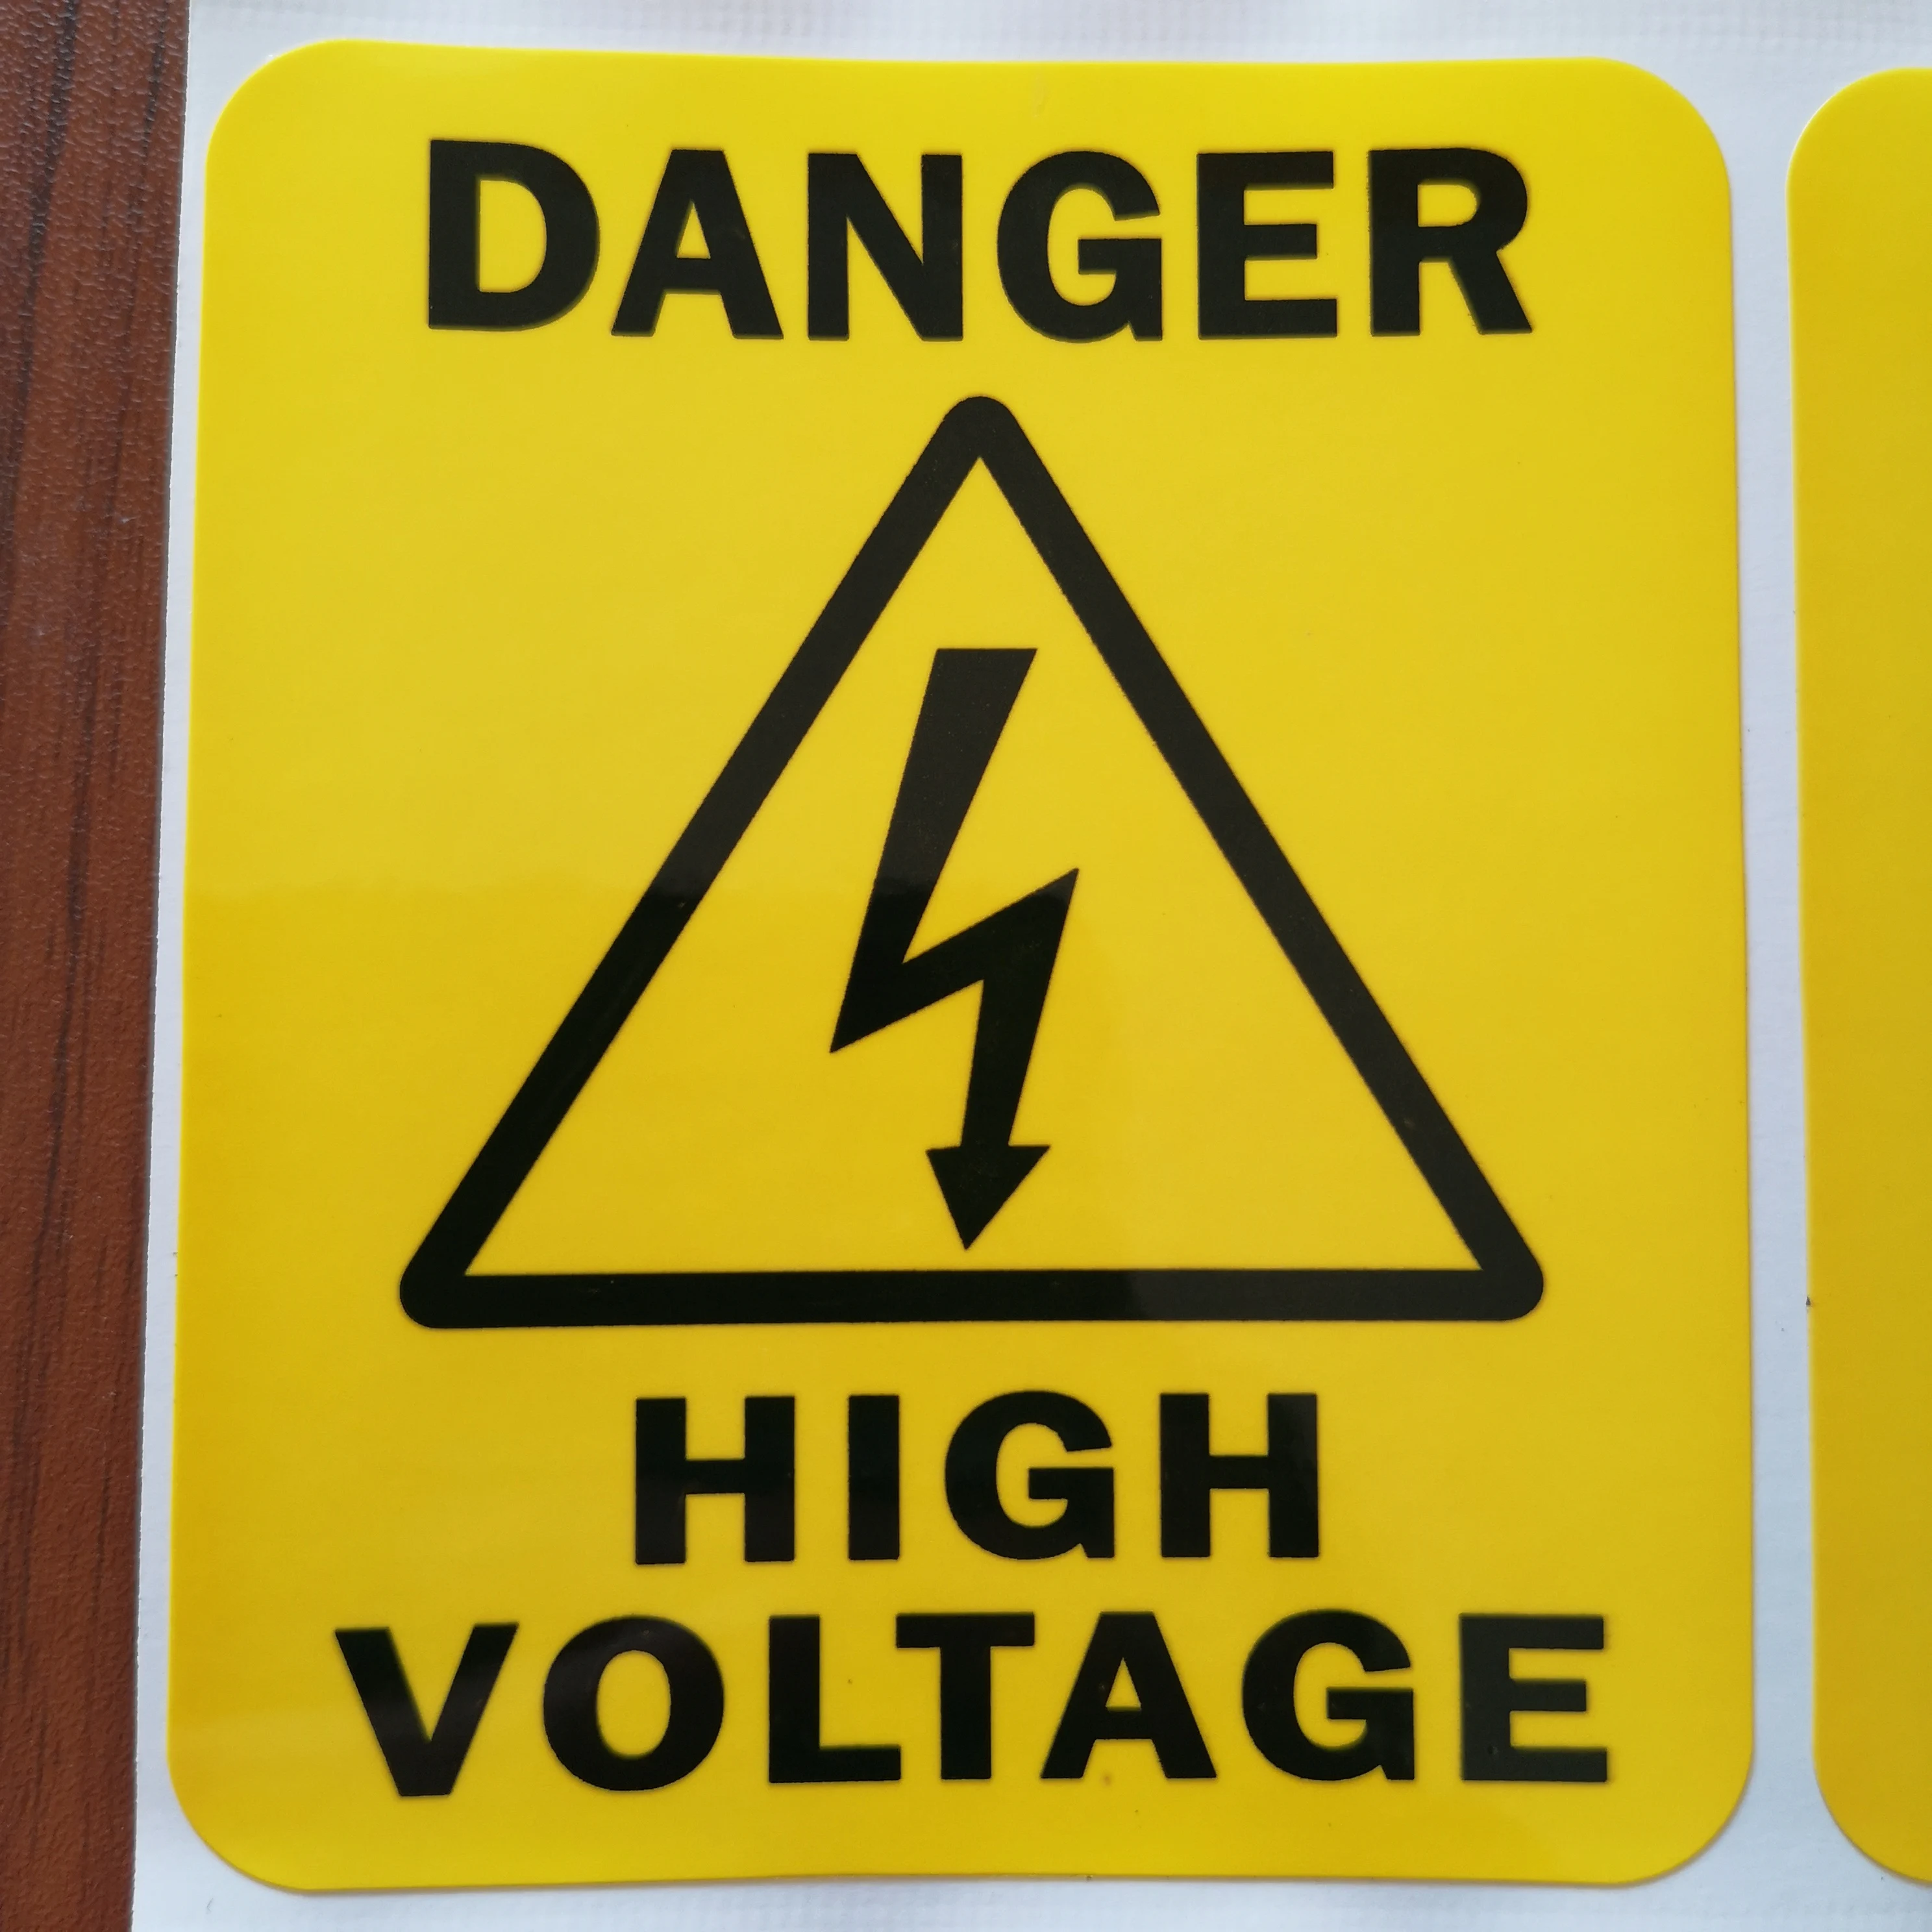 1000pcs/lot 76x90mm DANGER HIGH VOLTAGE Waterproof withstand sunshine Self-adhesive label sticker, Item No.CA29 Free shipping